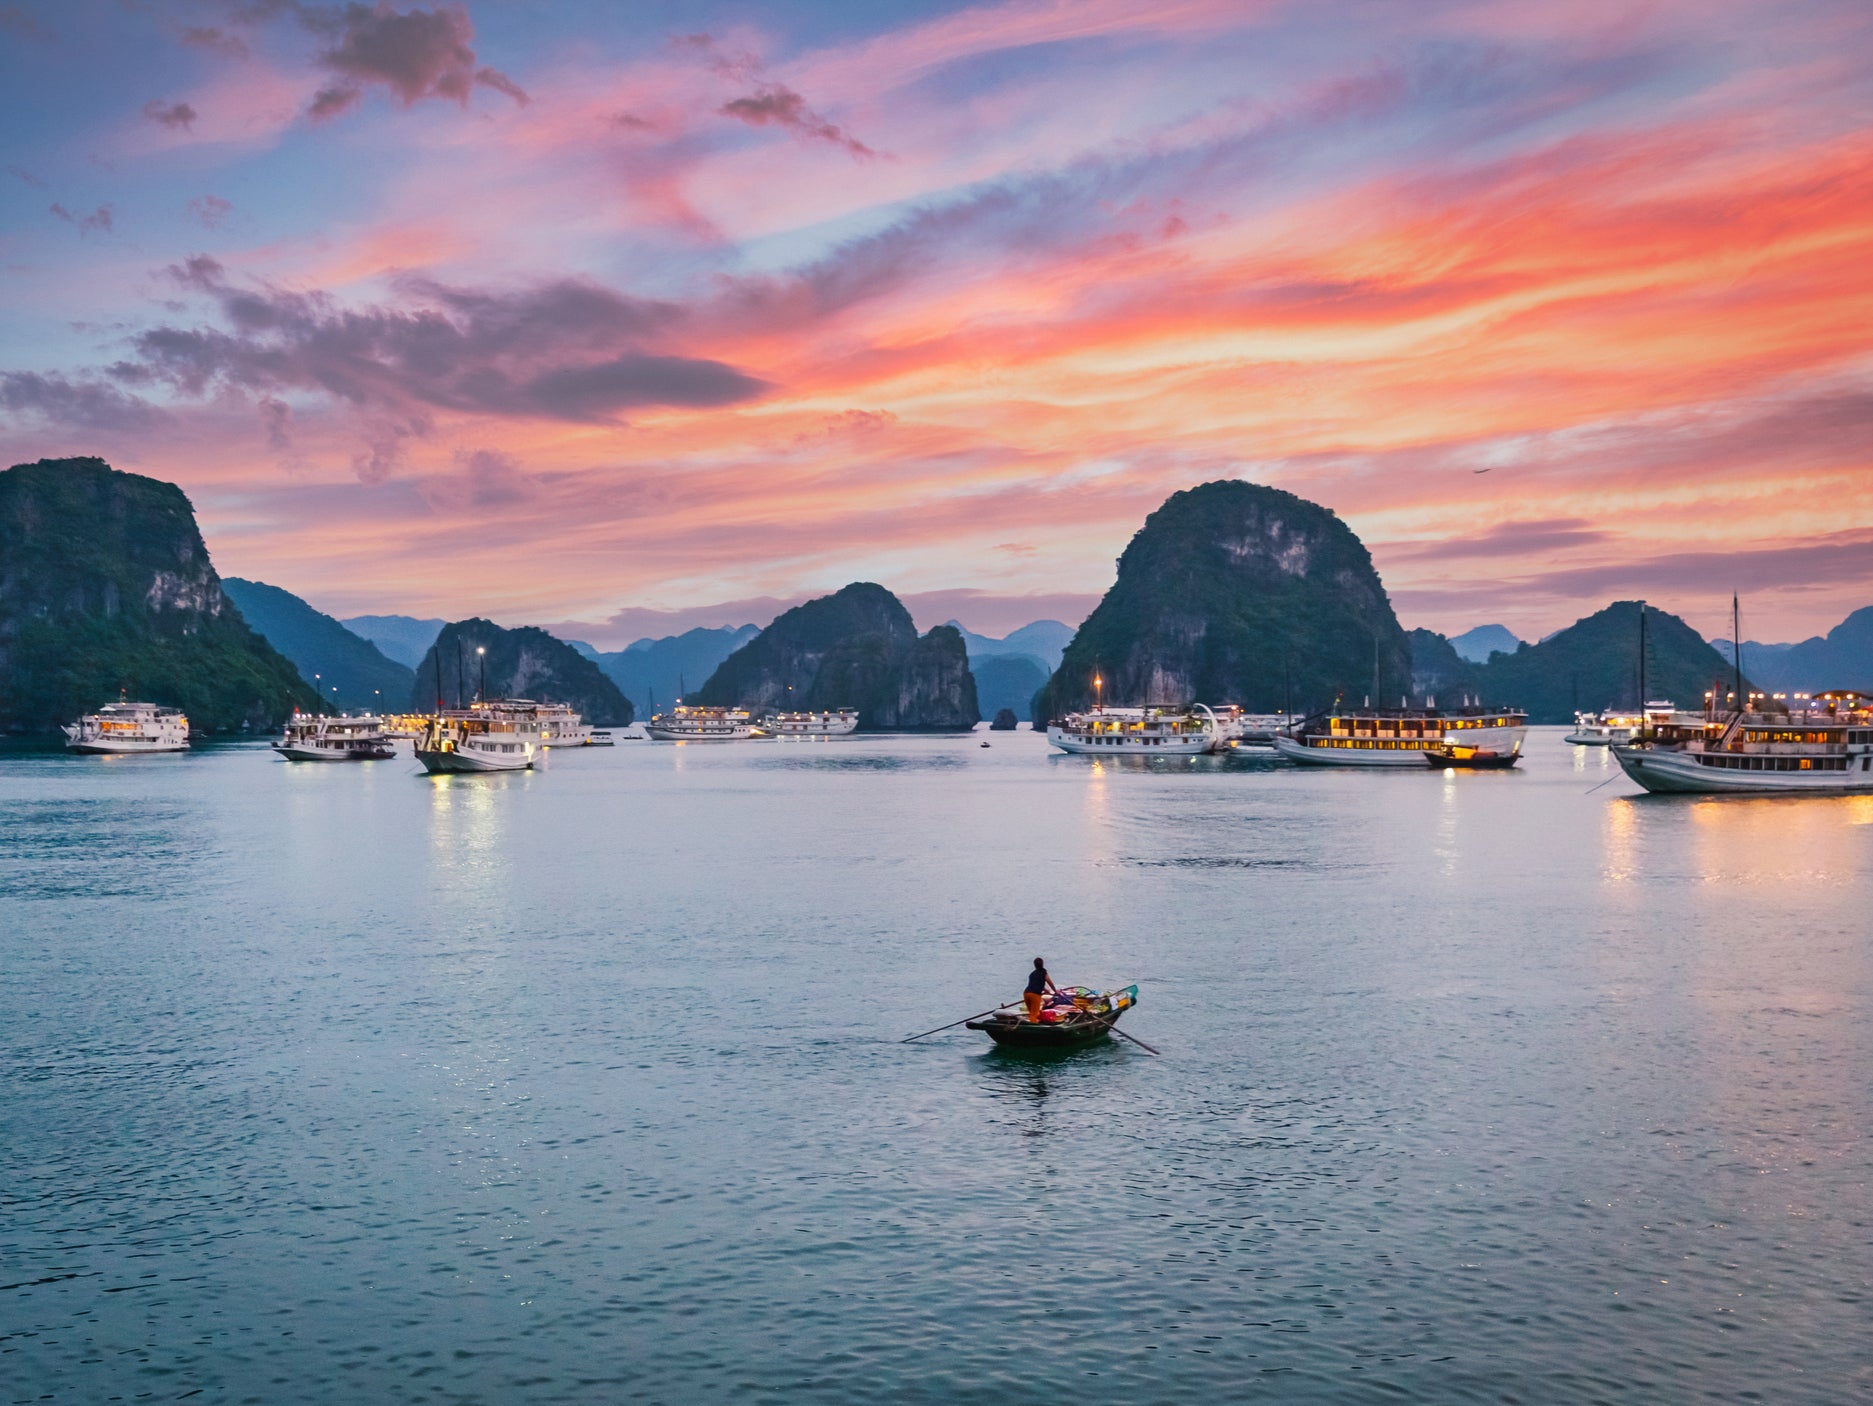 All aboard: be sure to sail the picturesque waters of Ha Long Bay